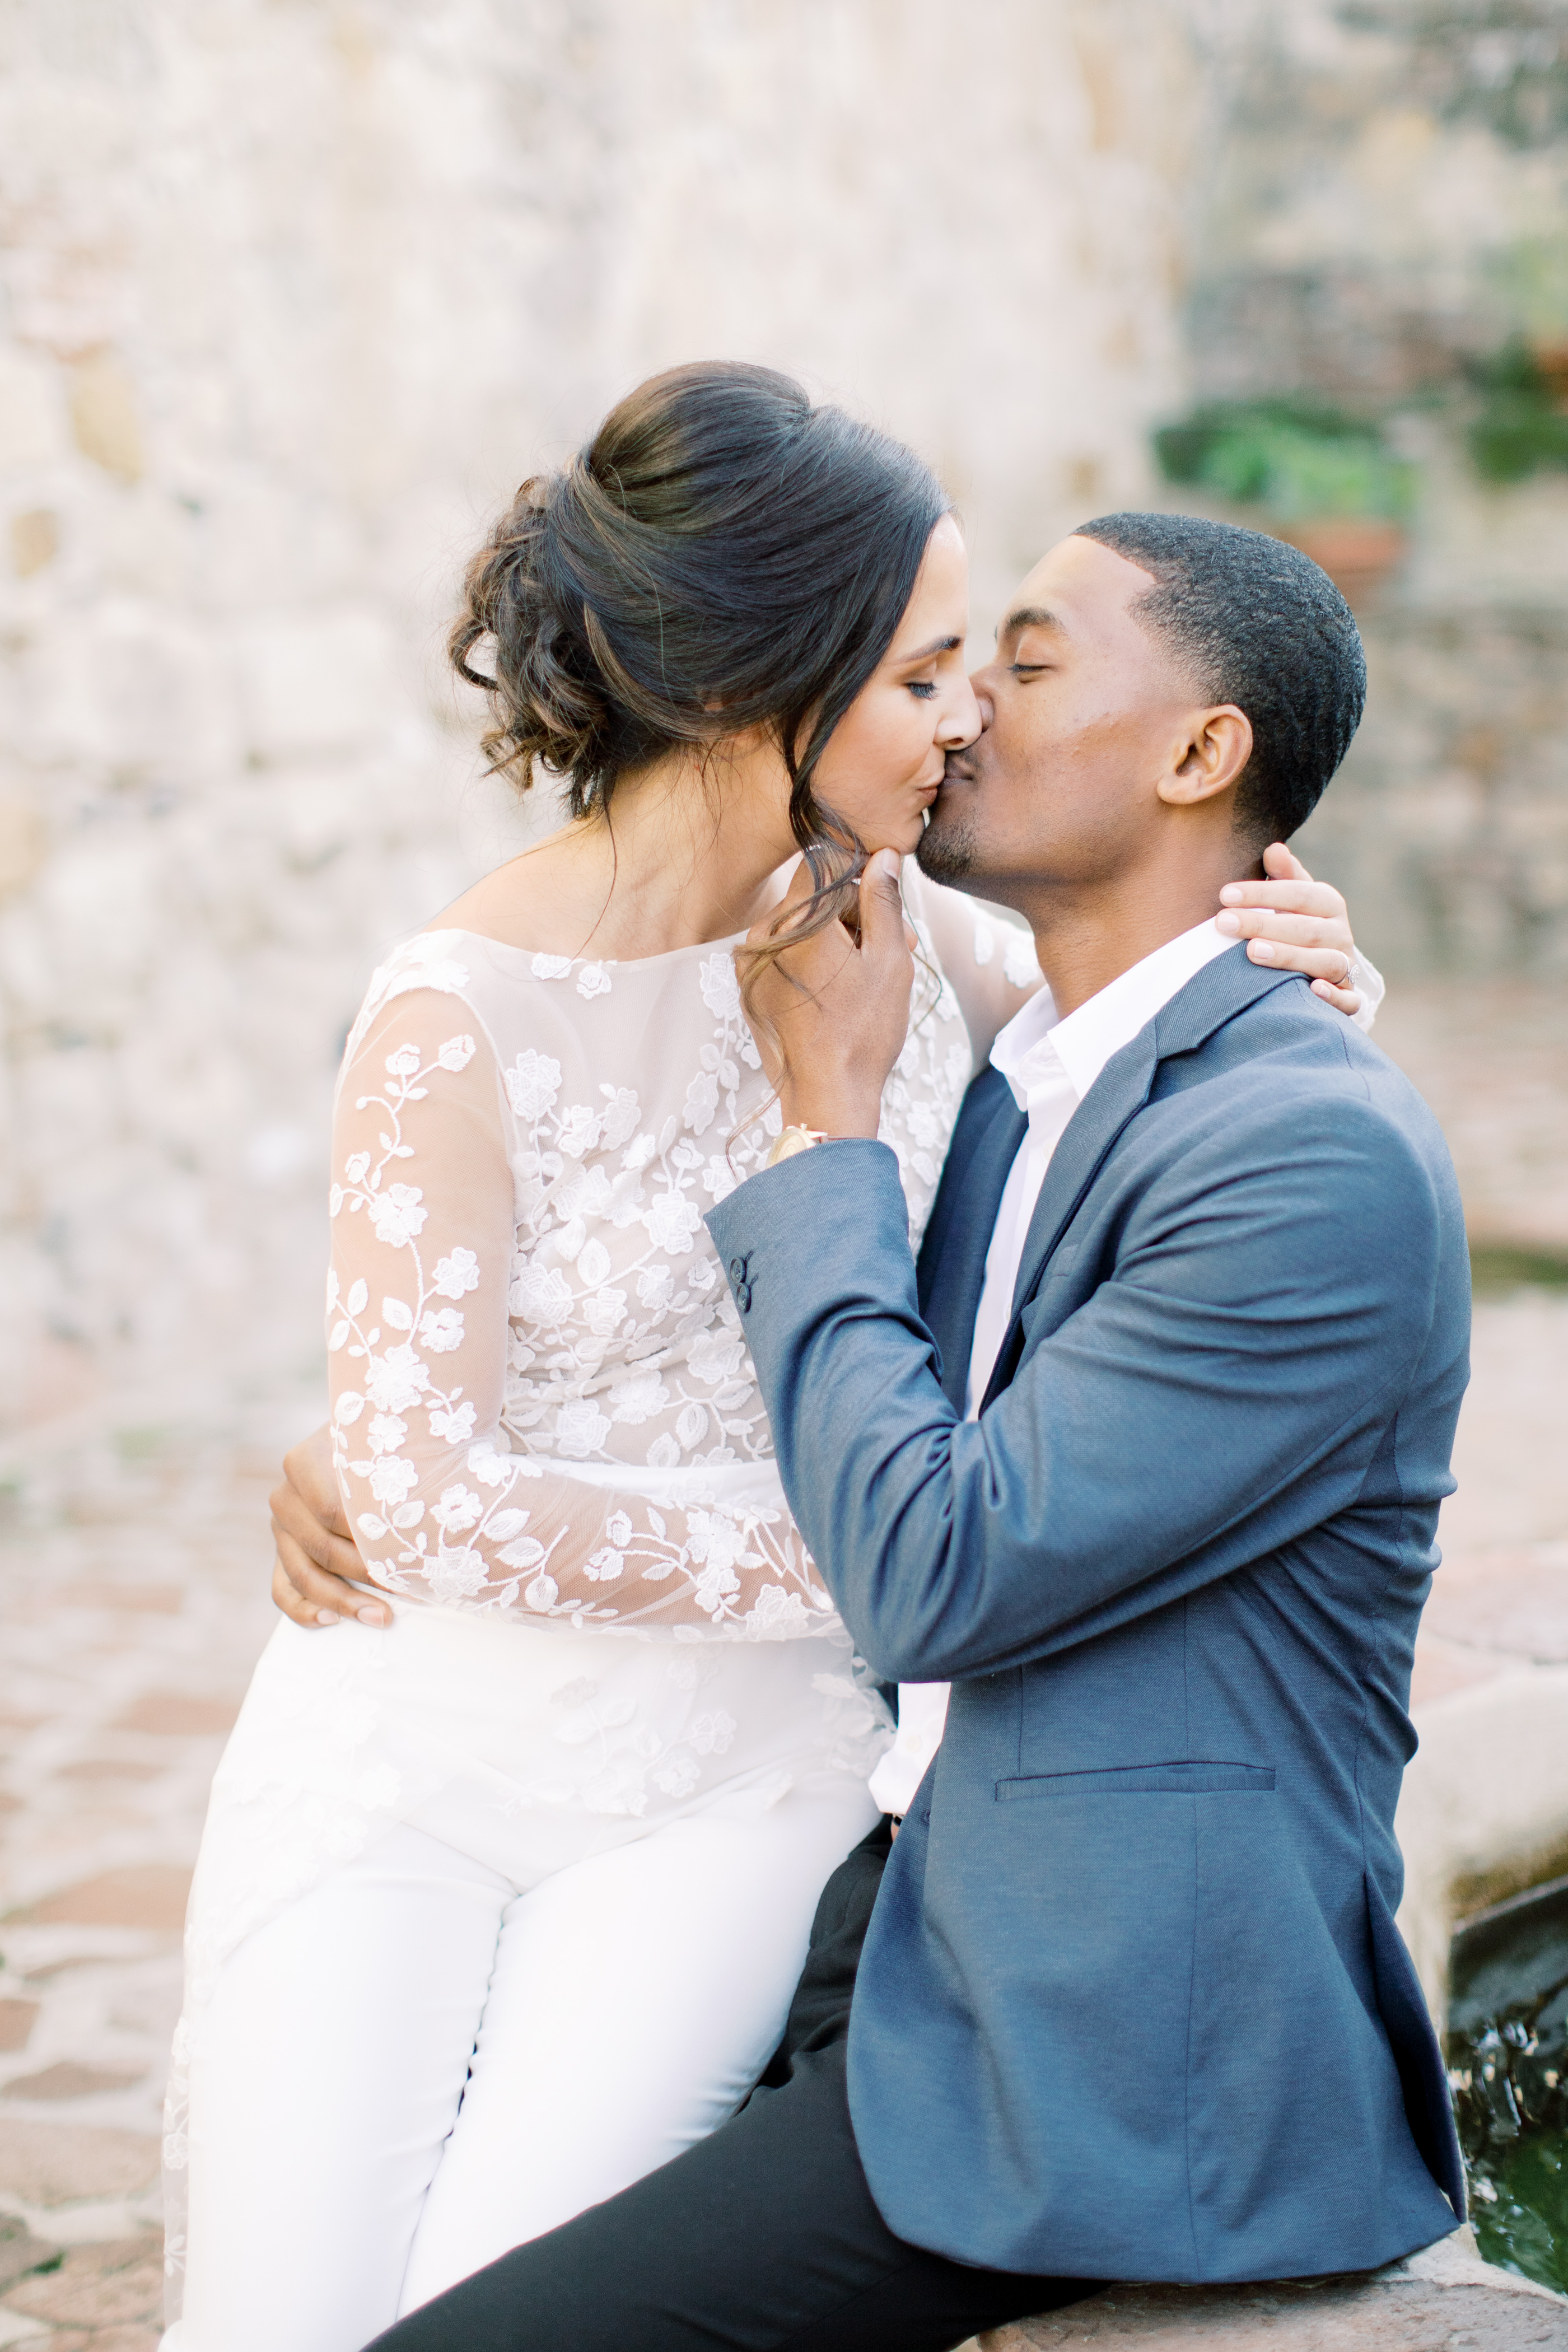 Bride with a white jumper kissing her groom with blue suit during their elopement wedding